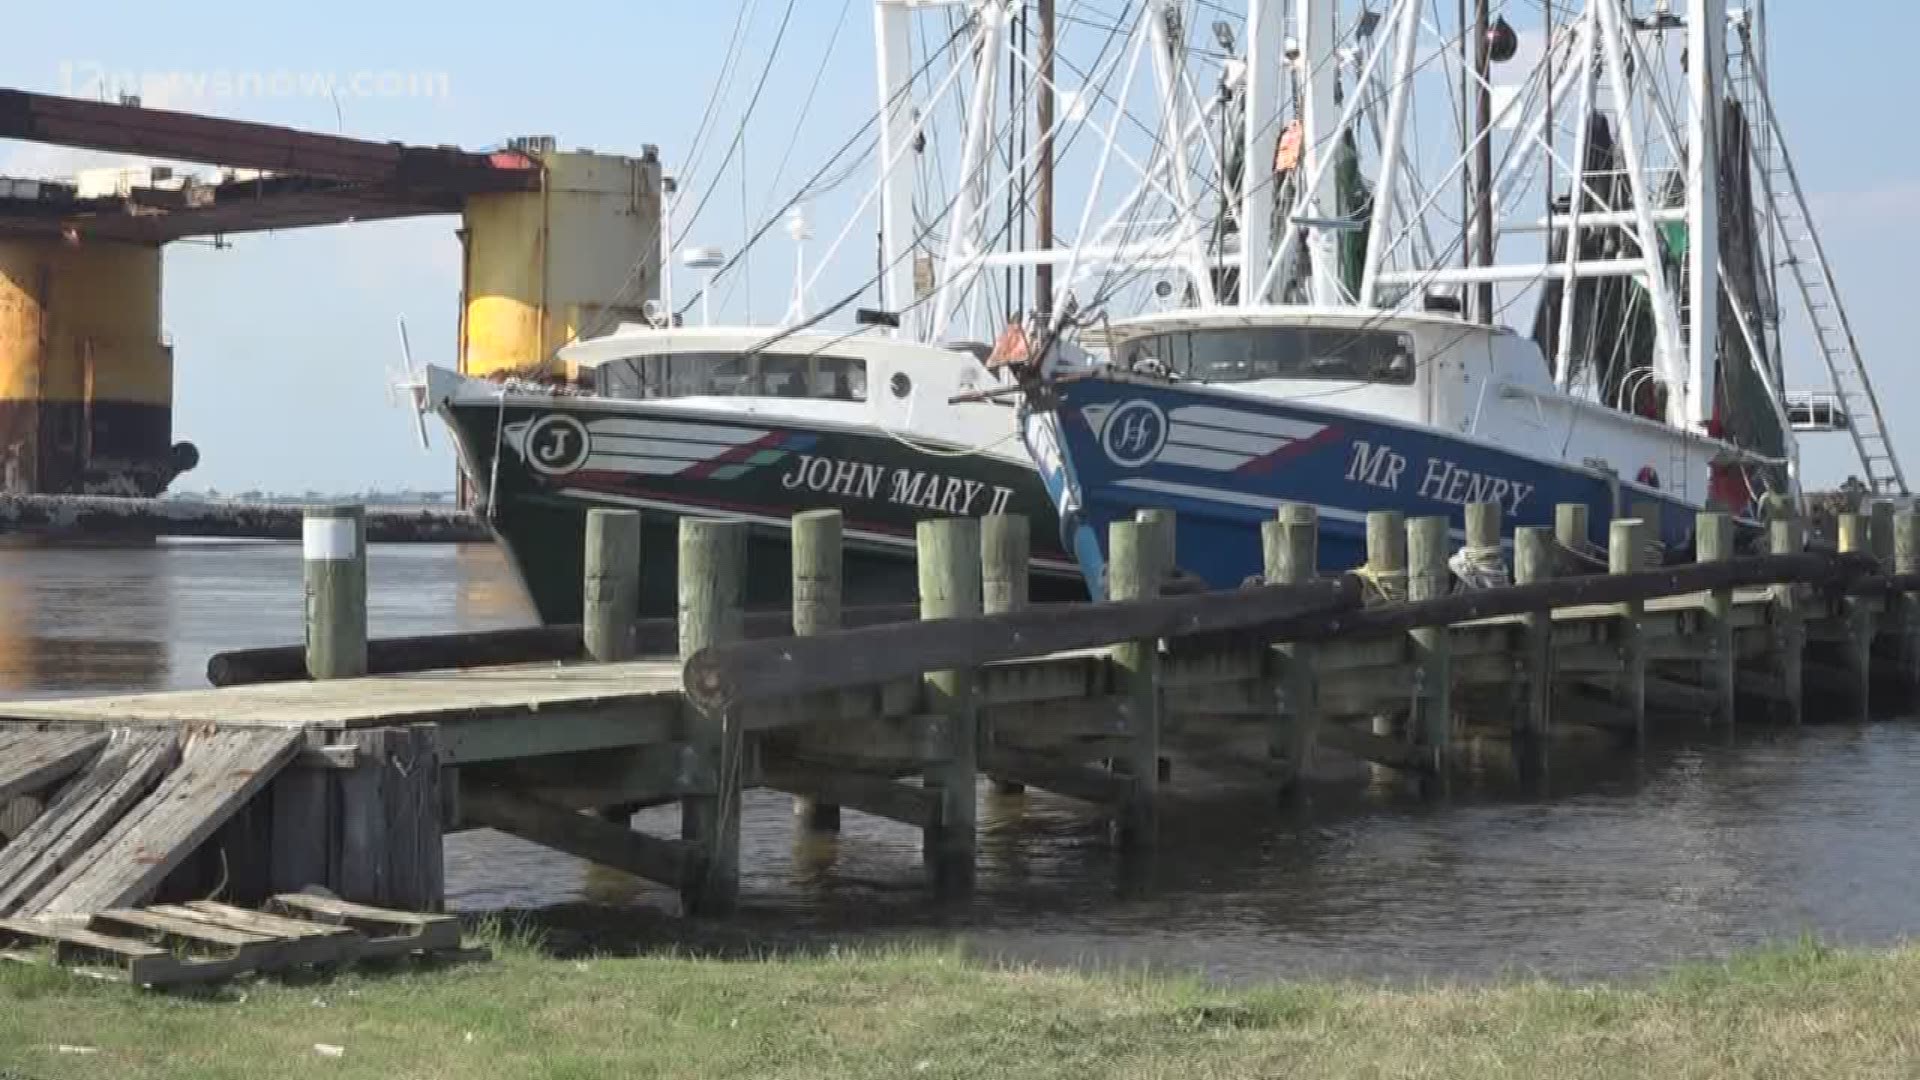 Local Shrimpers having trouble catching this season